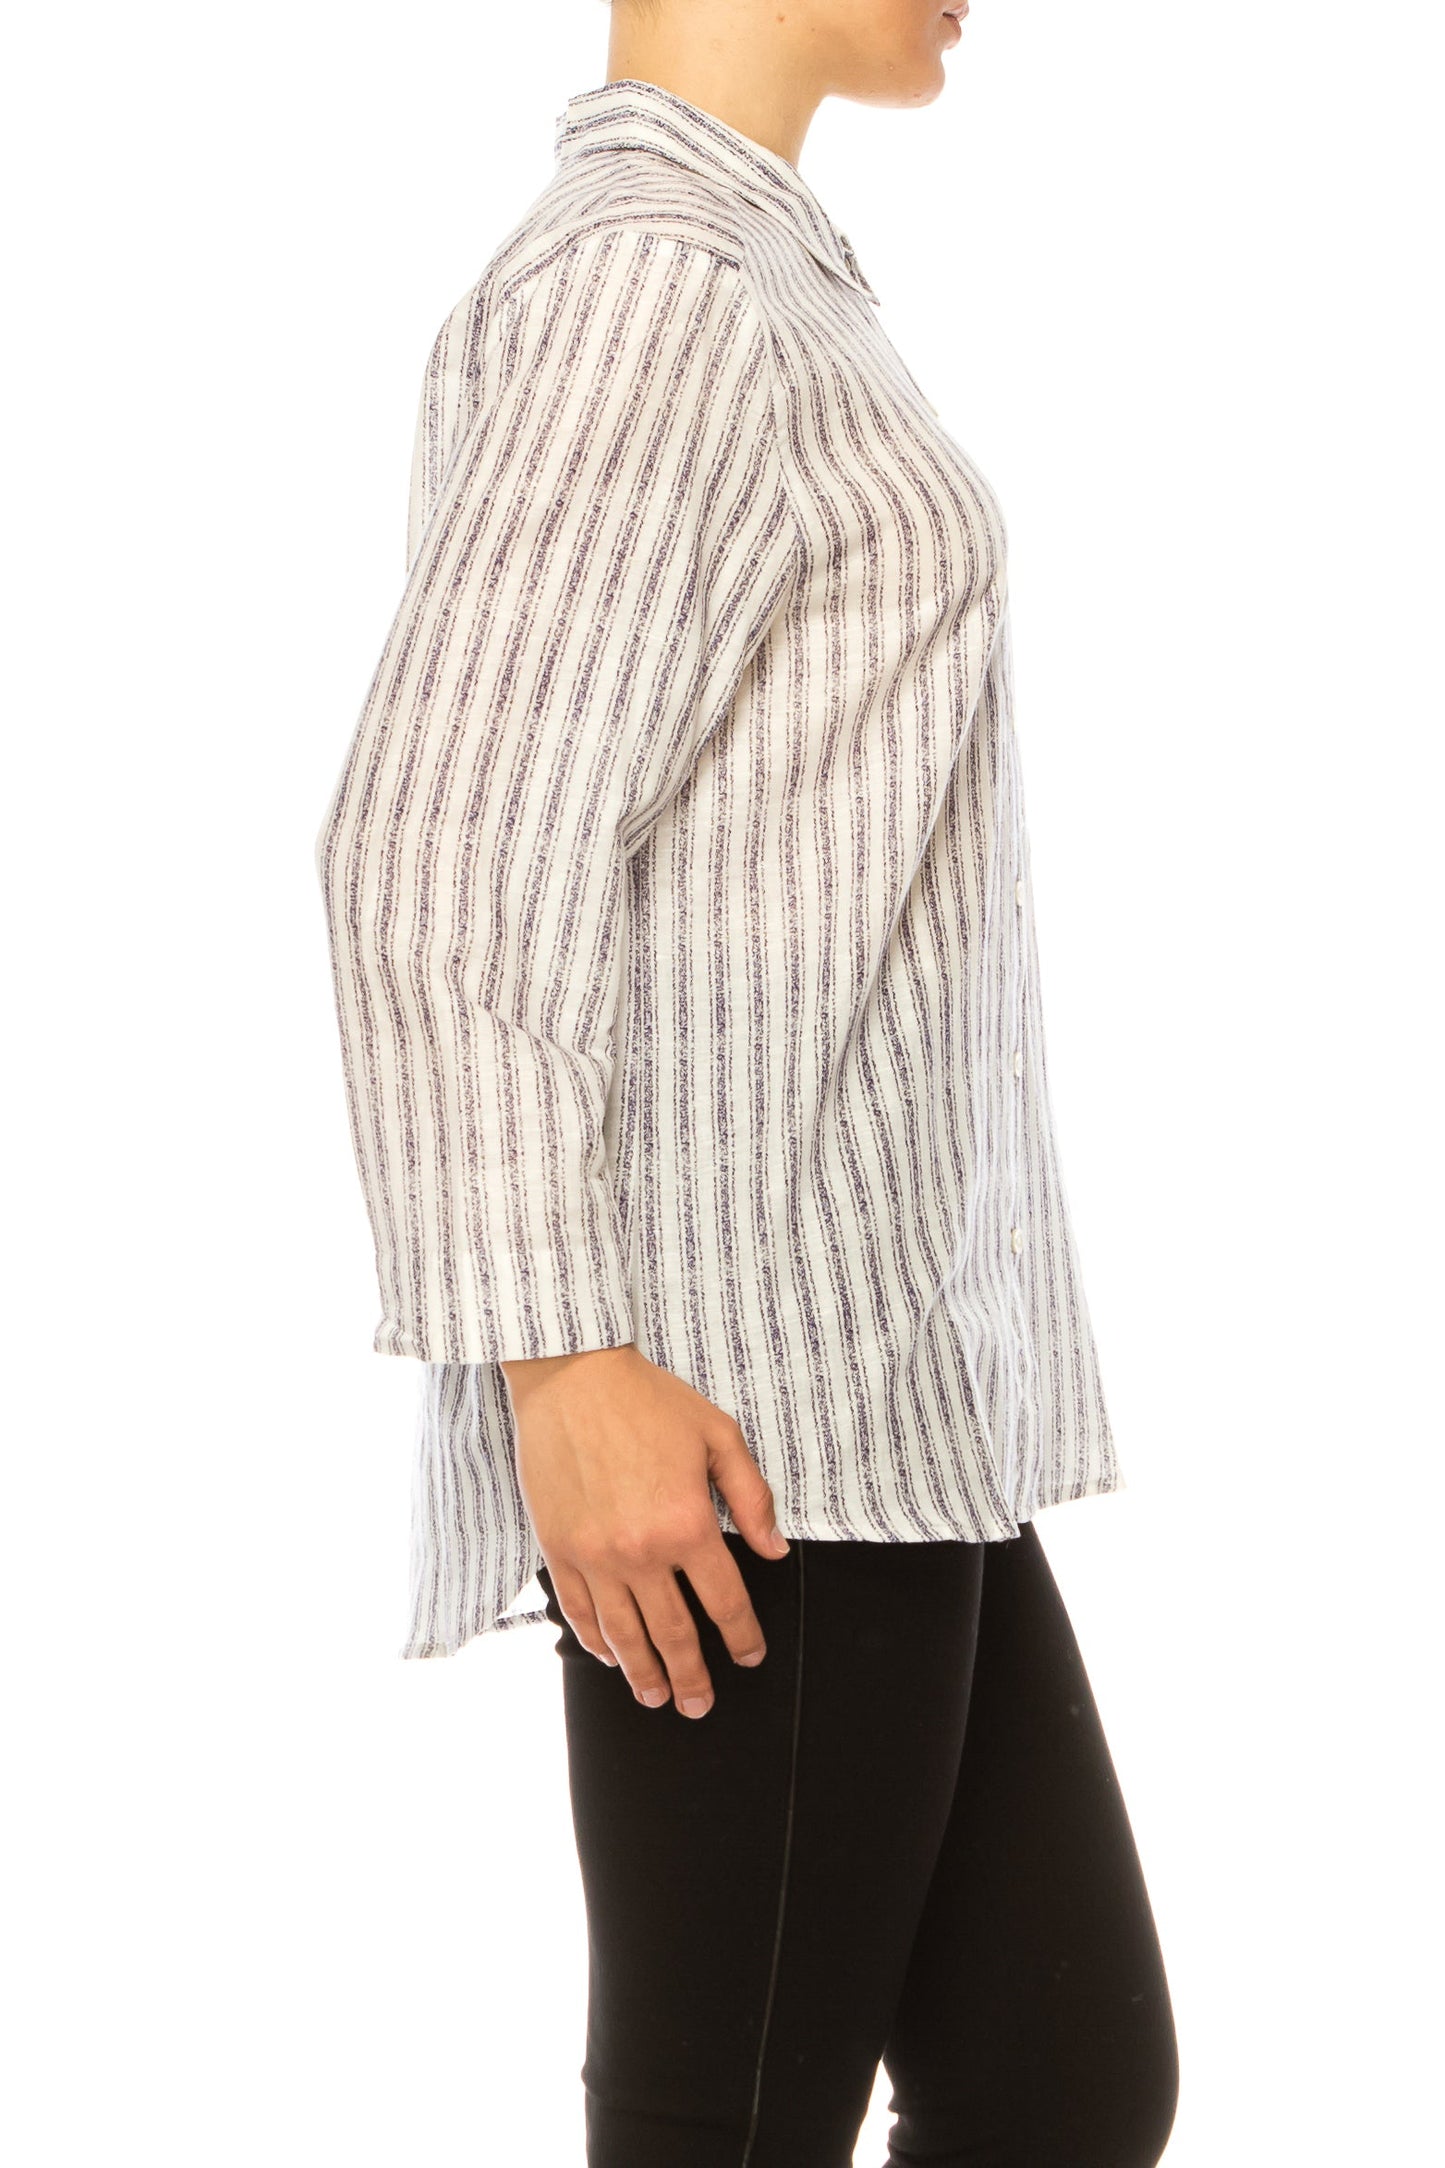 Hester & Orchard Button Down Long Sleeve Print Top